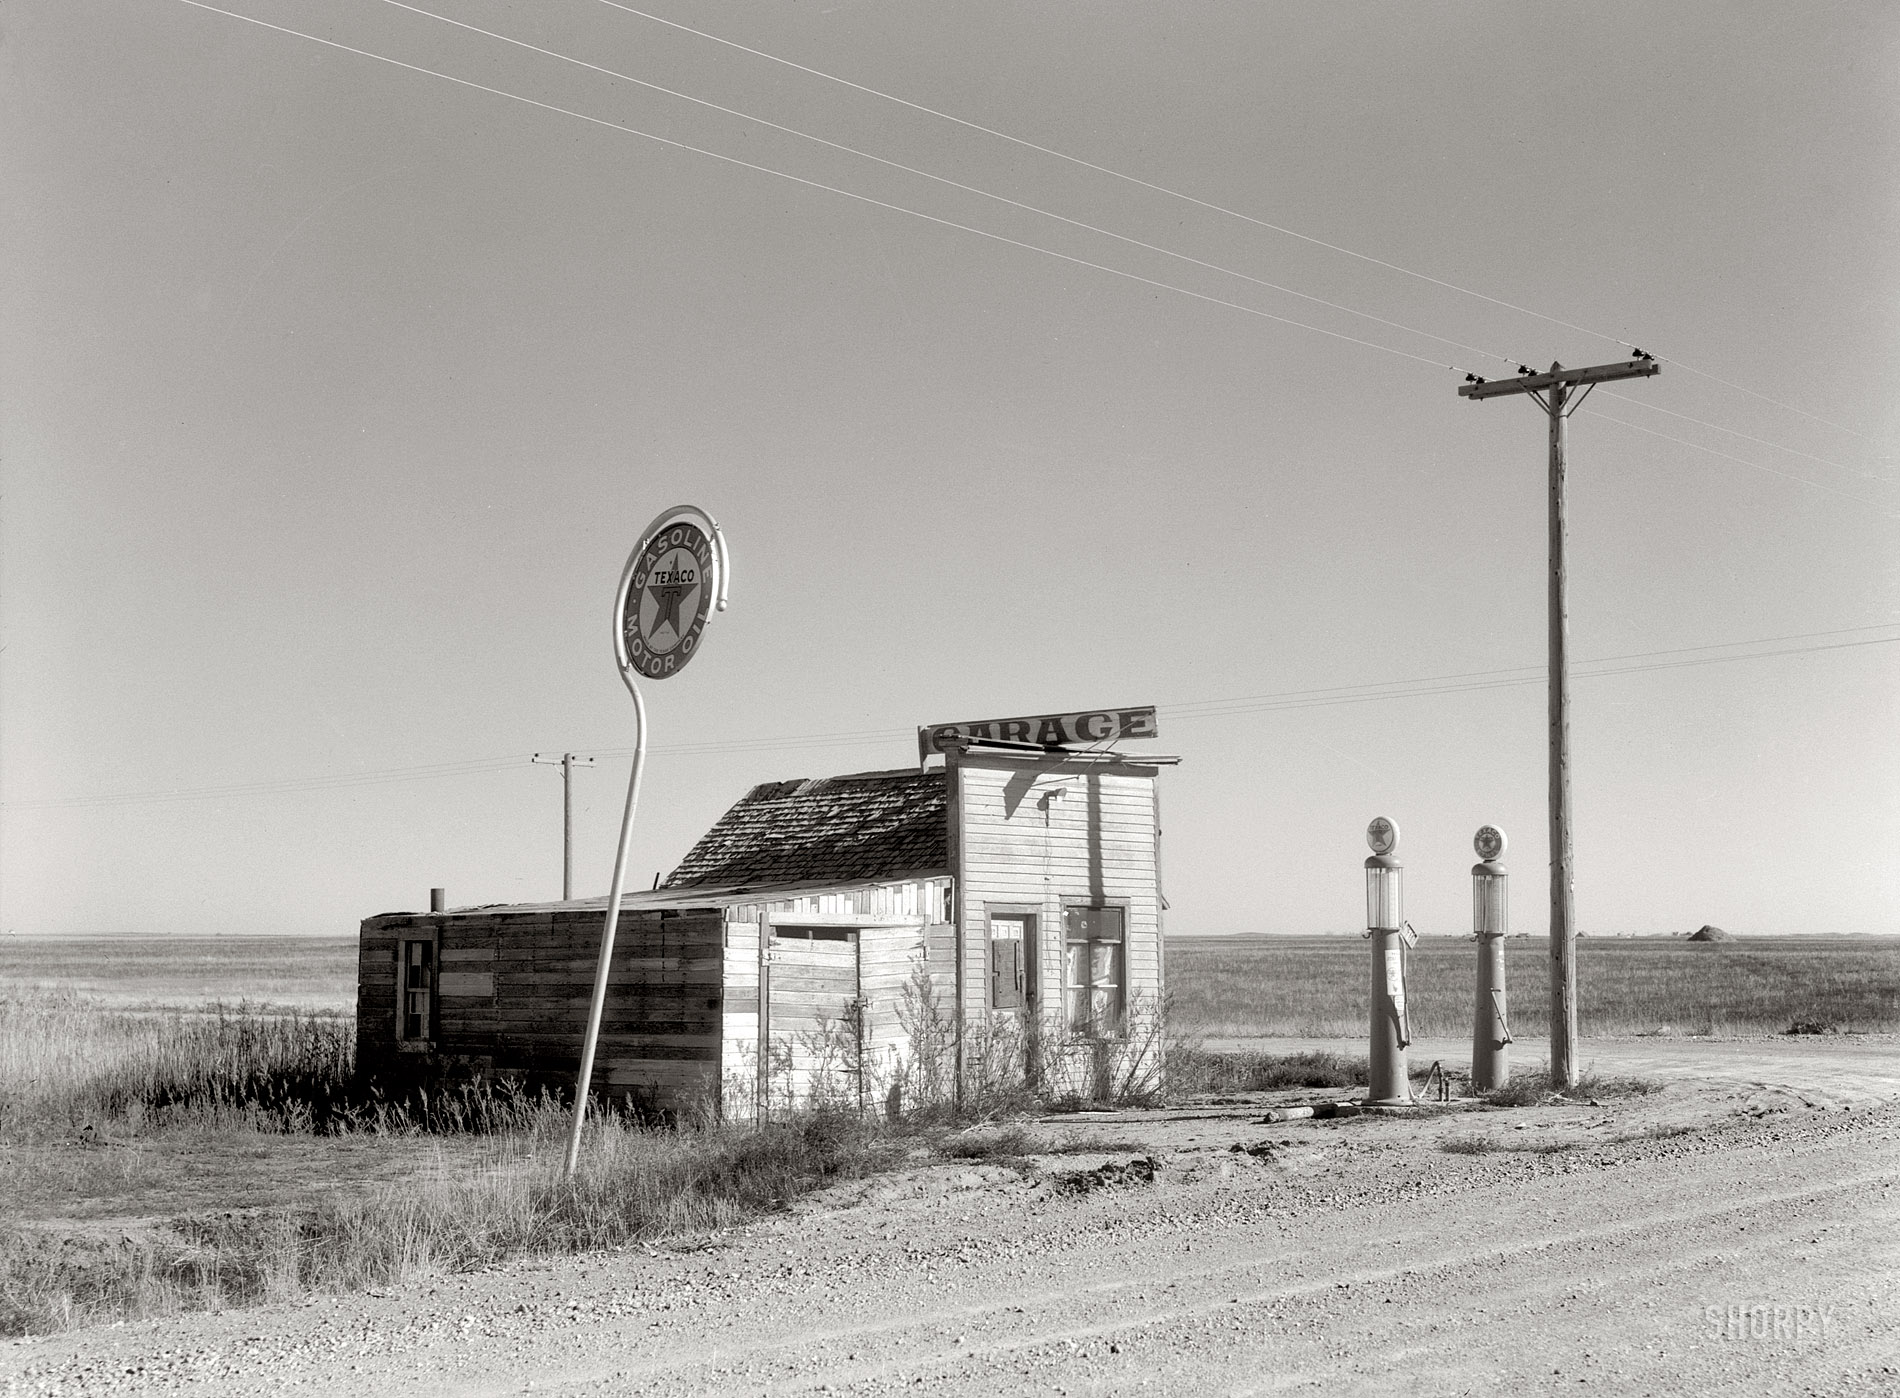 October 1937. "Abandoned garage on Highway No. 2. Western North Dakota." Medium format safety negative by Russell Lee for the FSA. View full size.